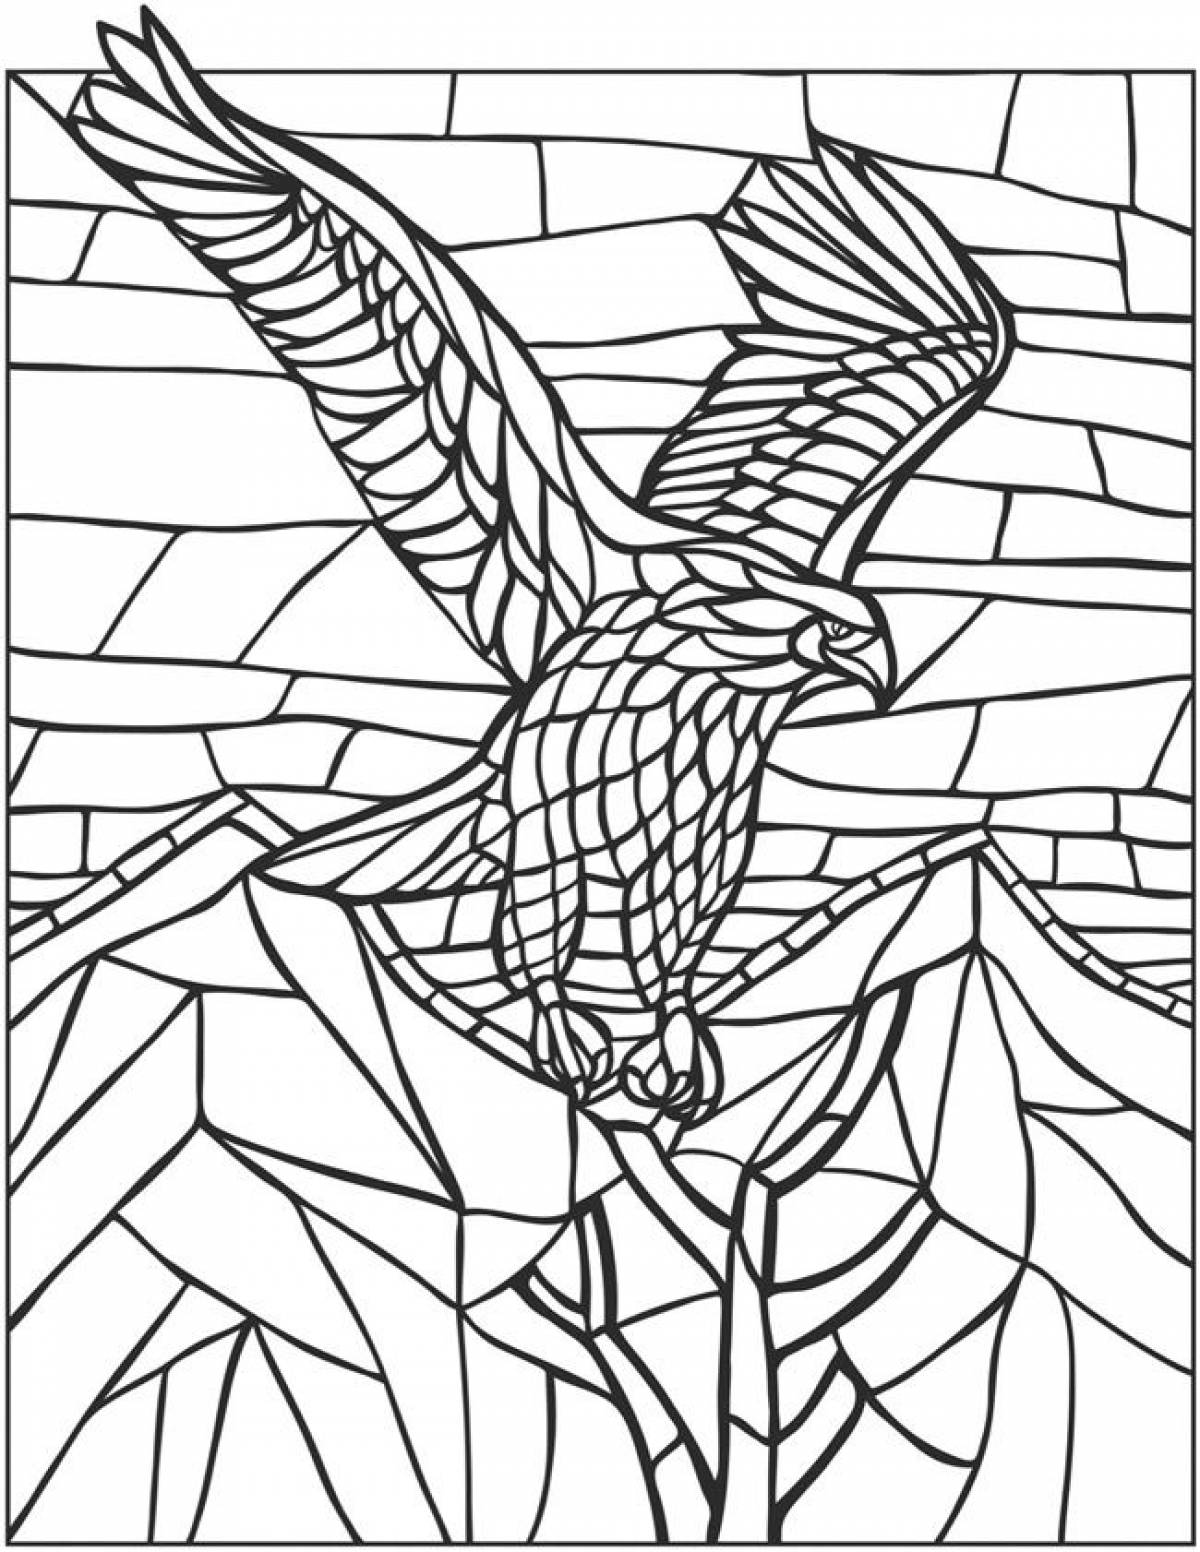 Stained glass eagle